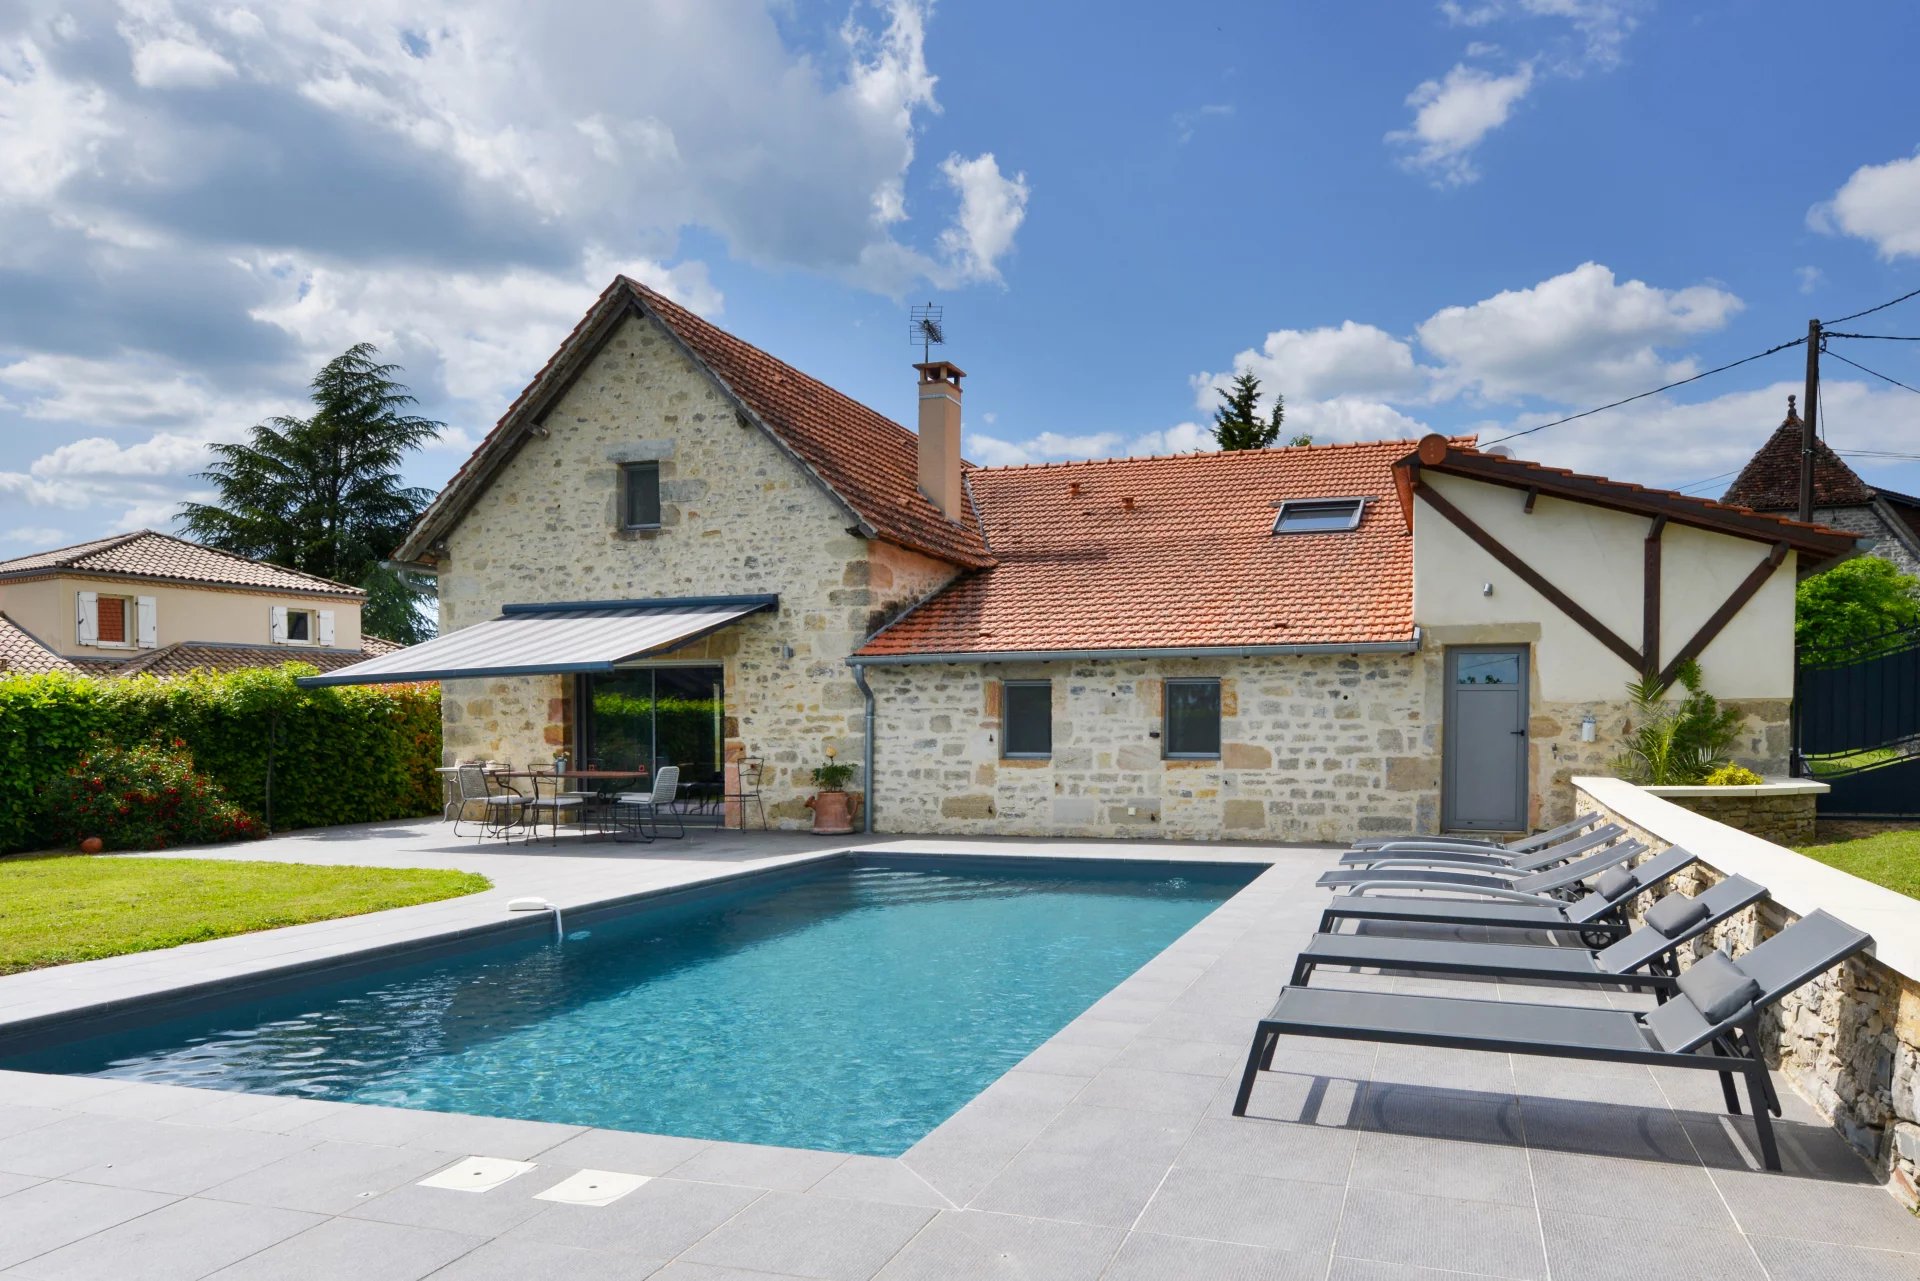 Substantial stone house with pool in a quiet hamlet setting